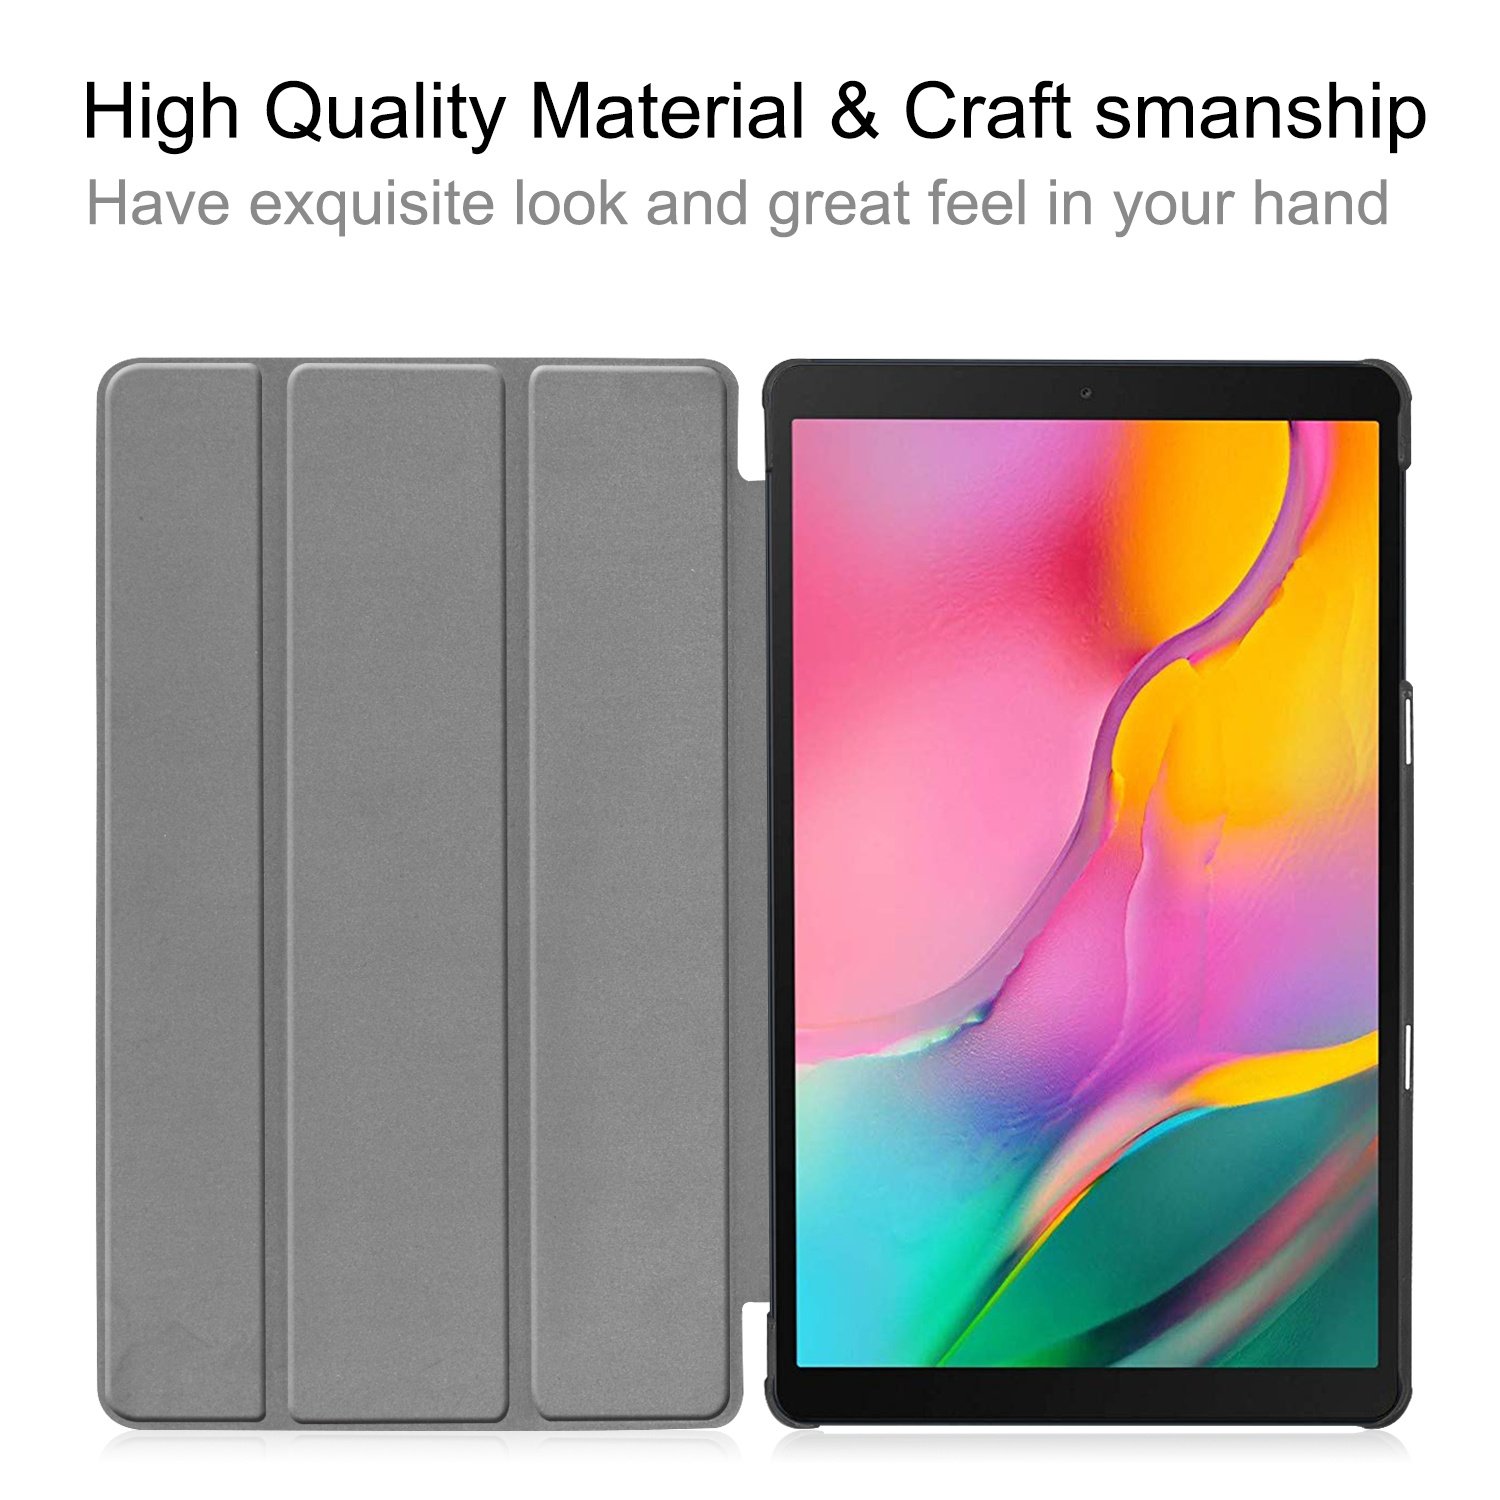 Sta op Verkeersopstopping Ass Samsung Galaxy Tab A 2019 hoes - Tri-Fold Book Case - Donker Rood |  Case2go.nl